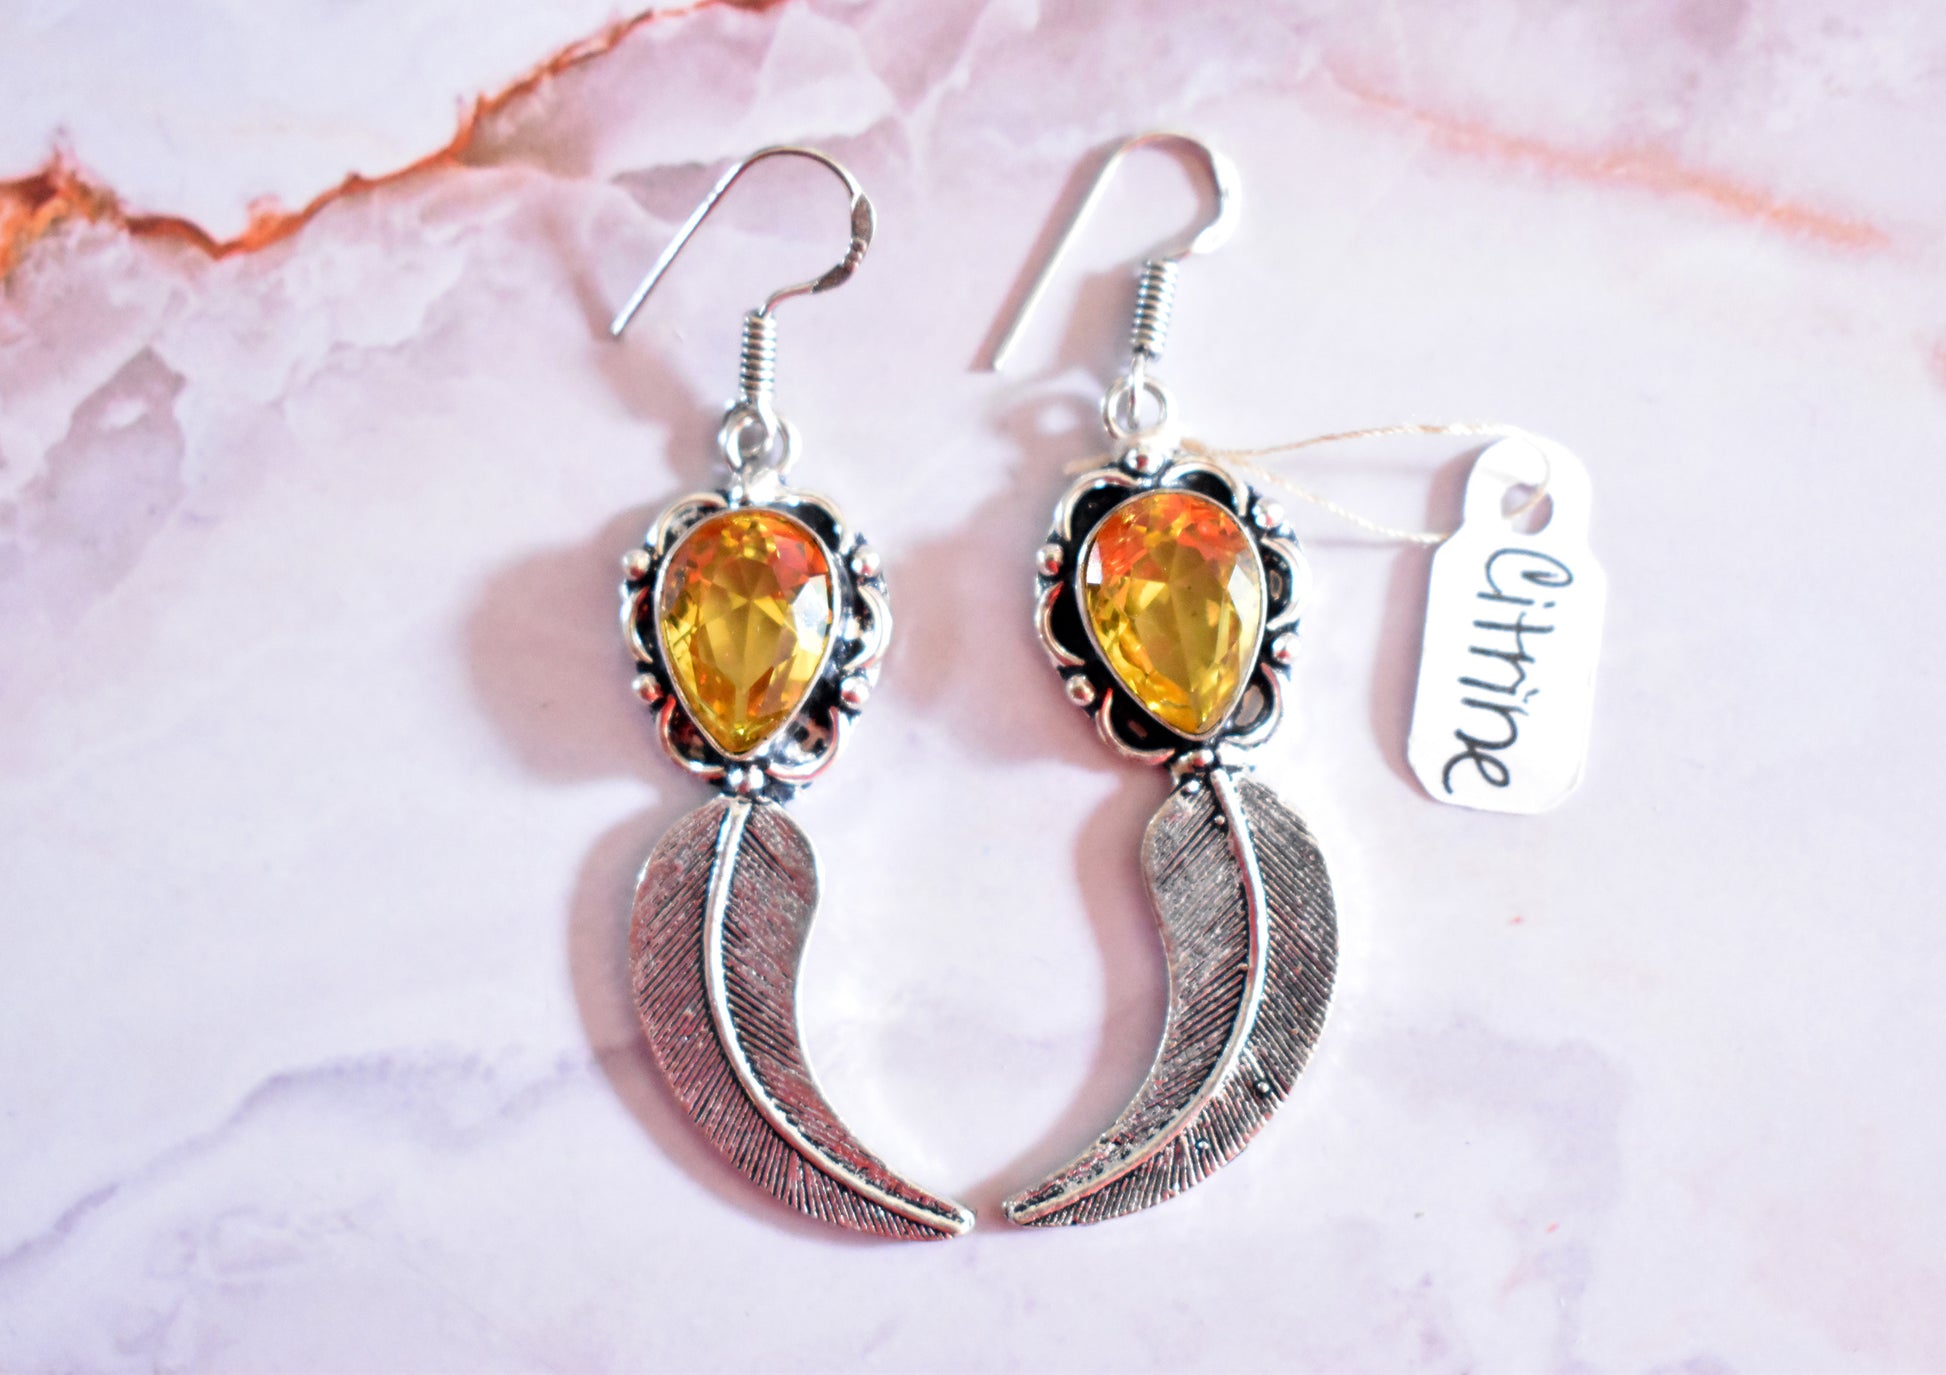 stones-of-transformation - Citrine Feather Earrings - Stones of Transformation - 